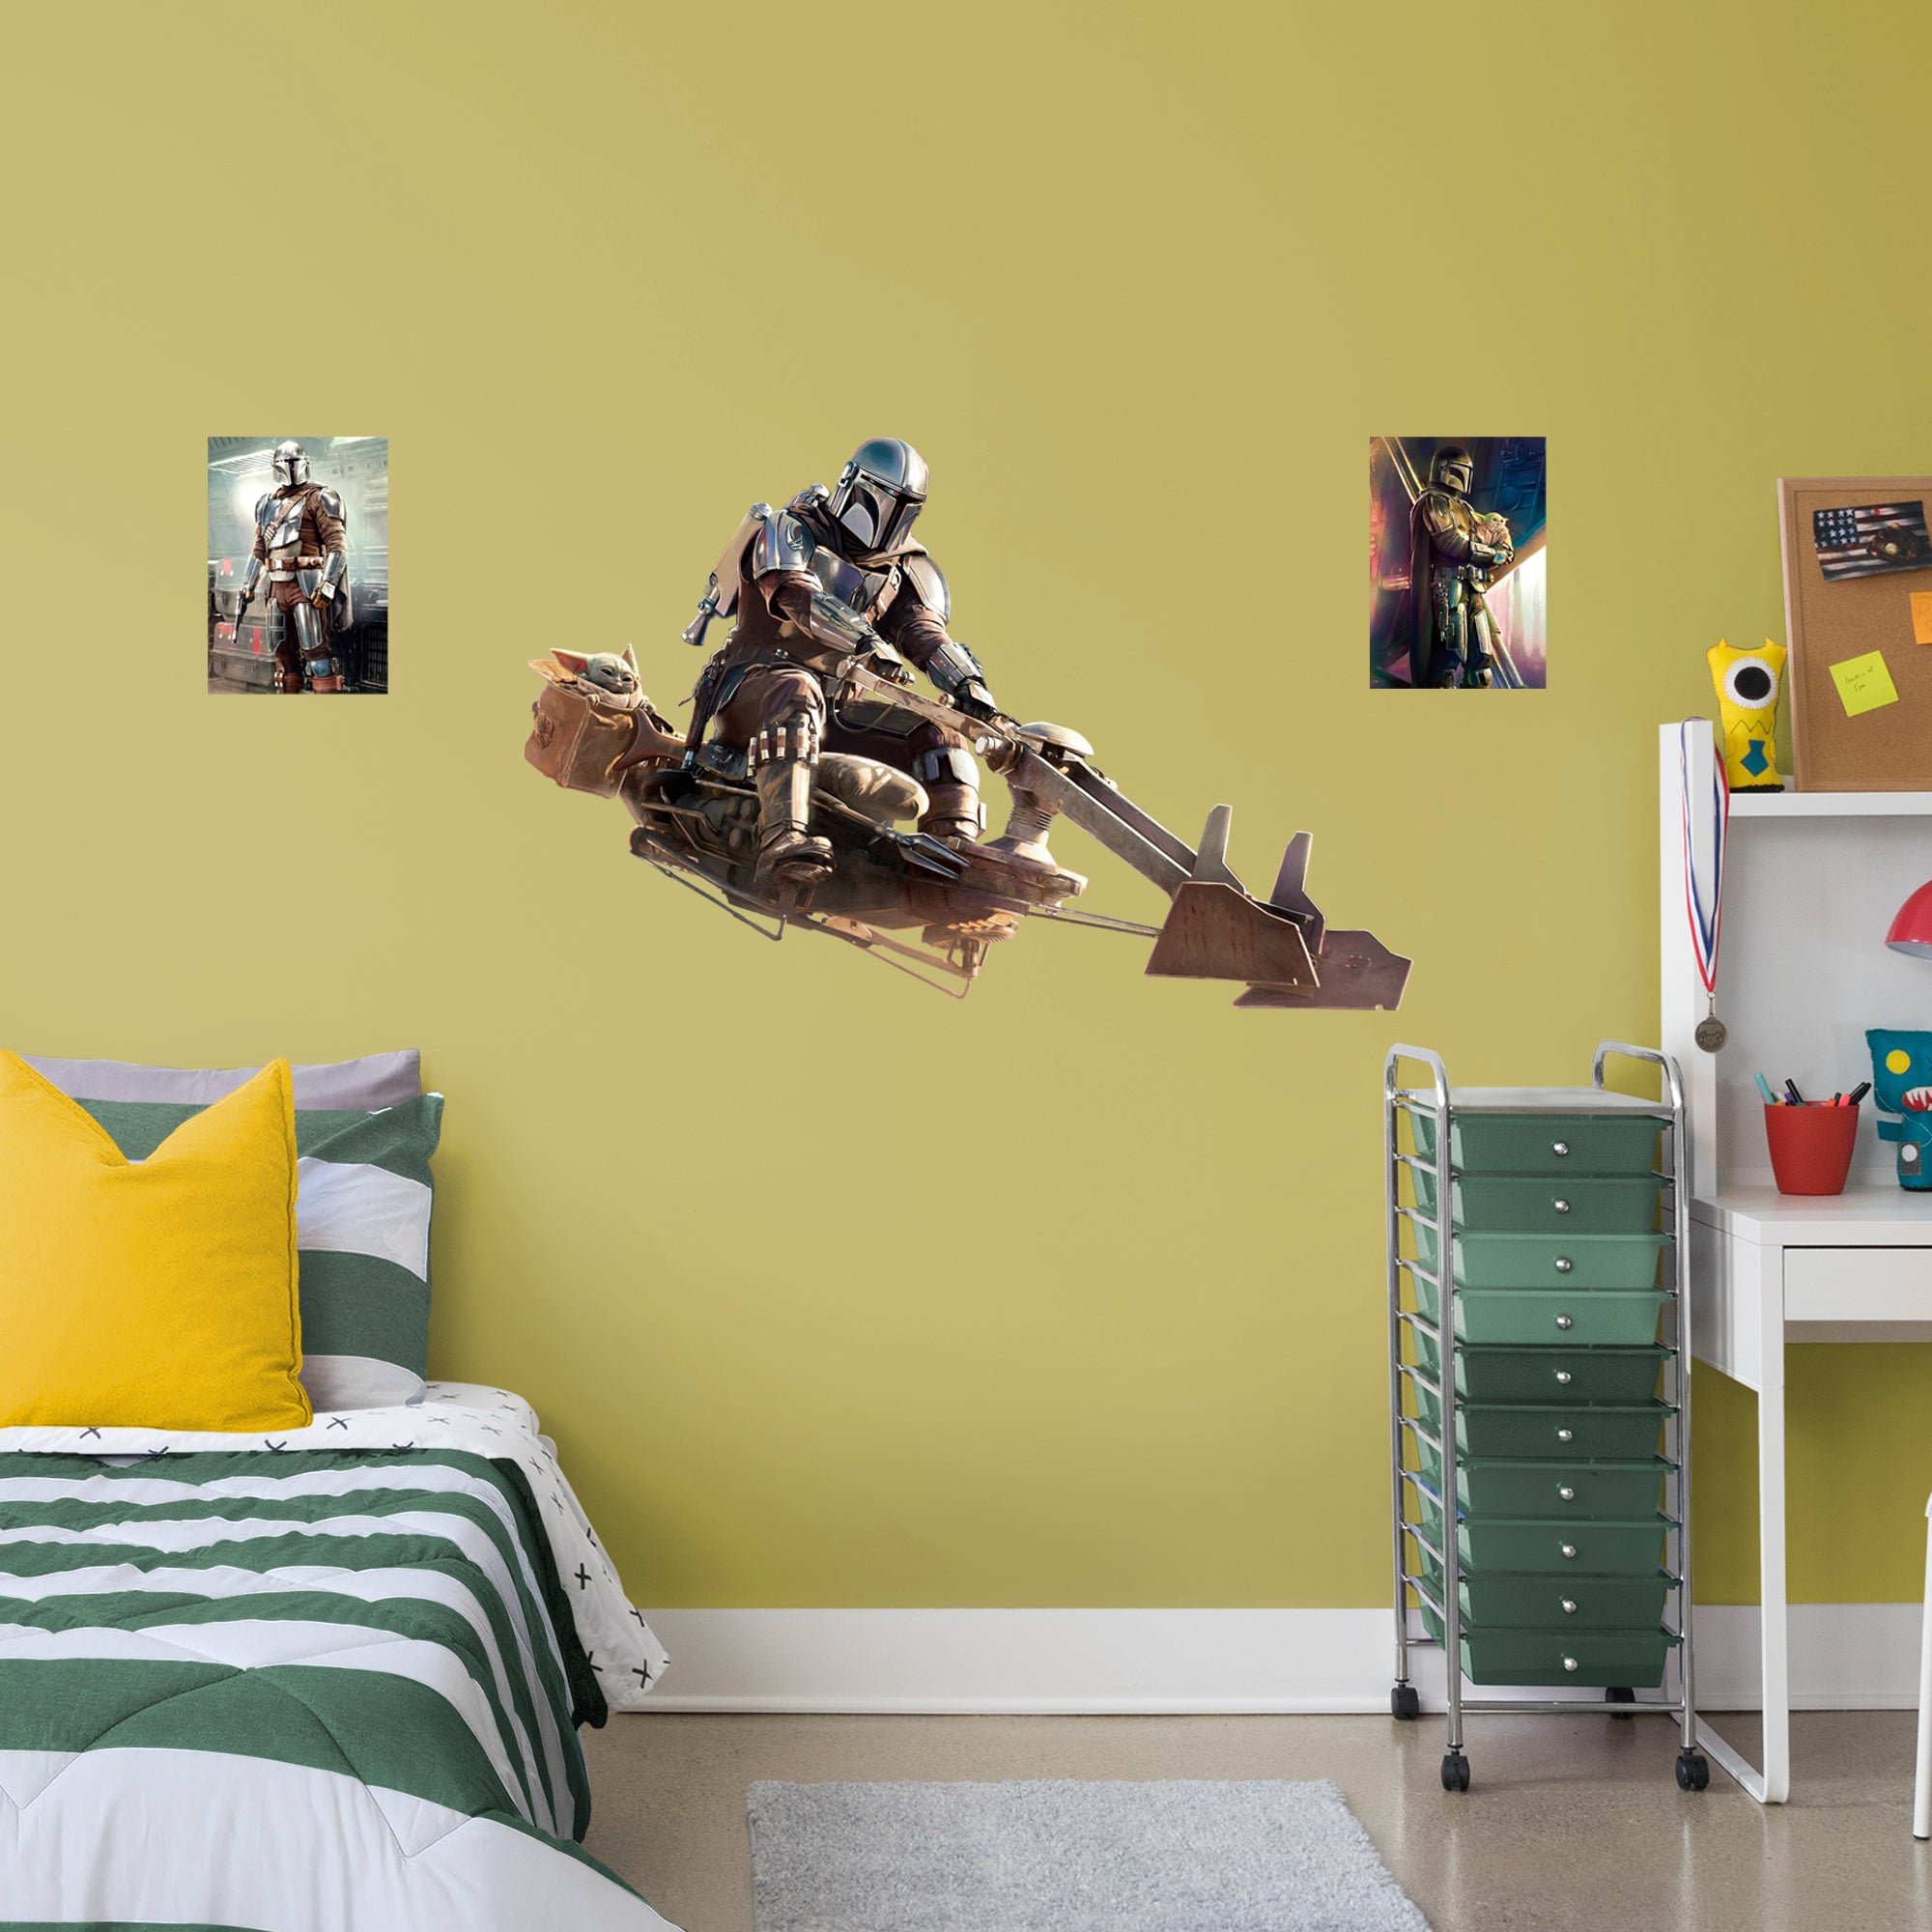 The Mandalorian and Child Speeder Bike - Officially Licensed Star Wars Removable Wall Decal Giant Character + 2 Decals (50"W x 3